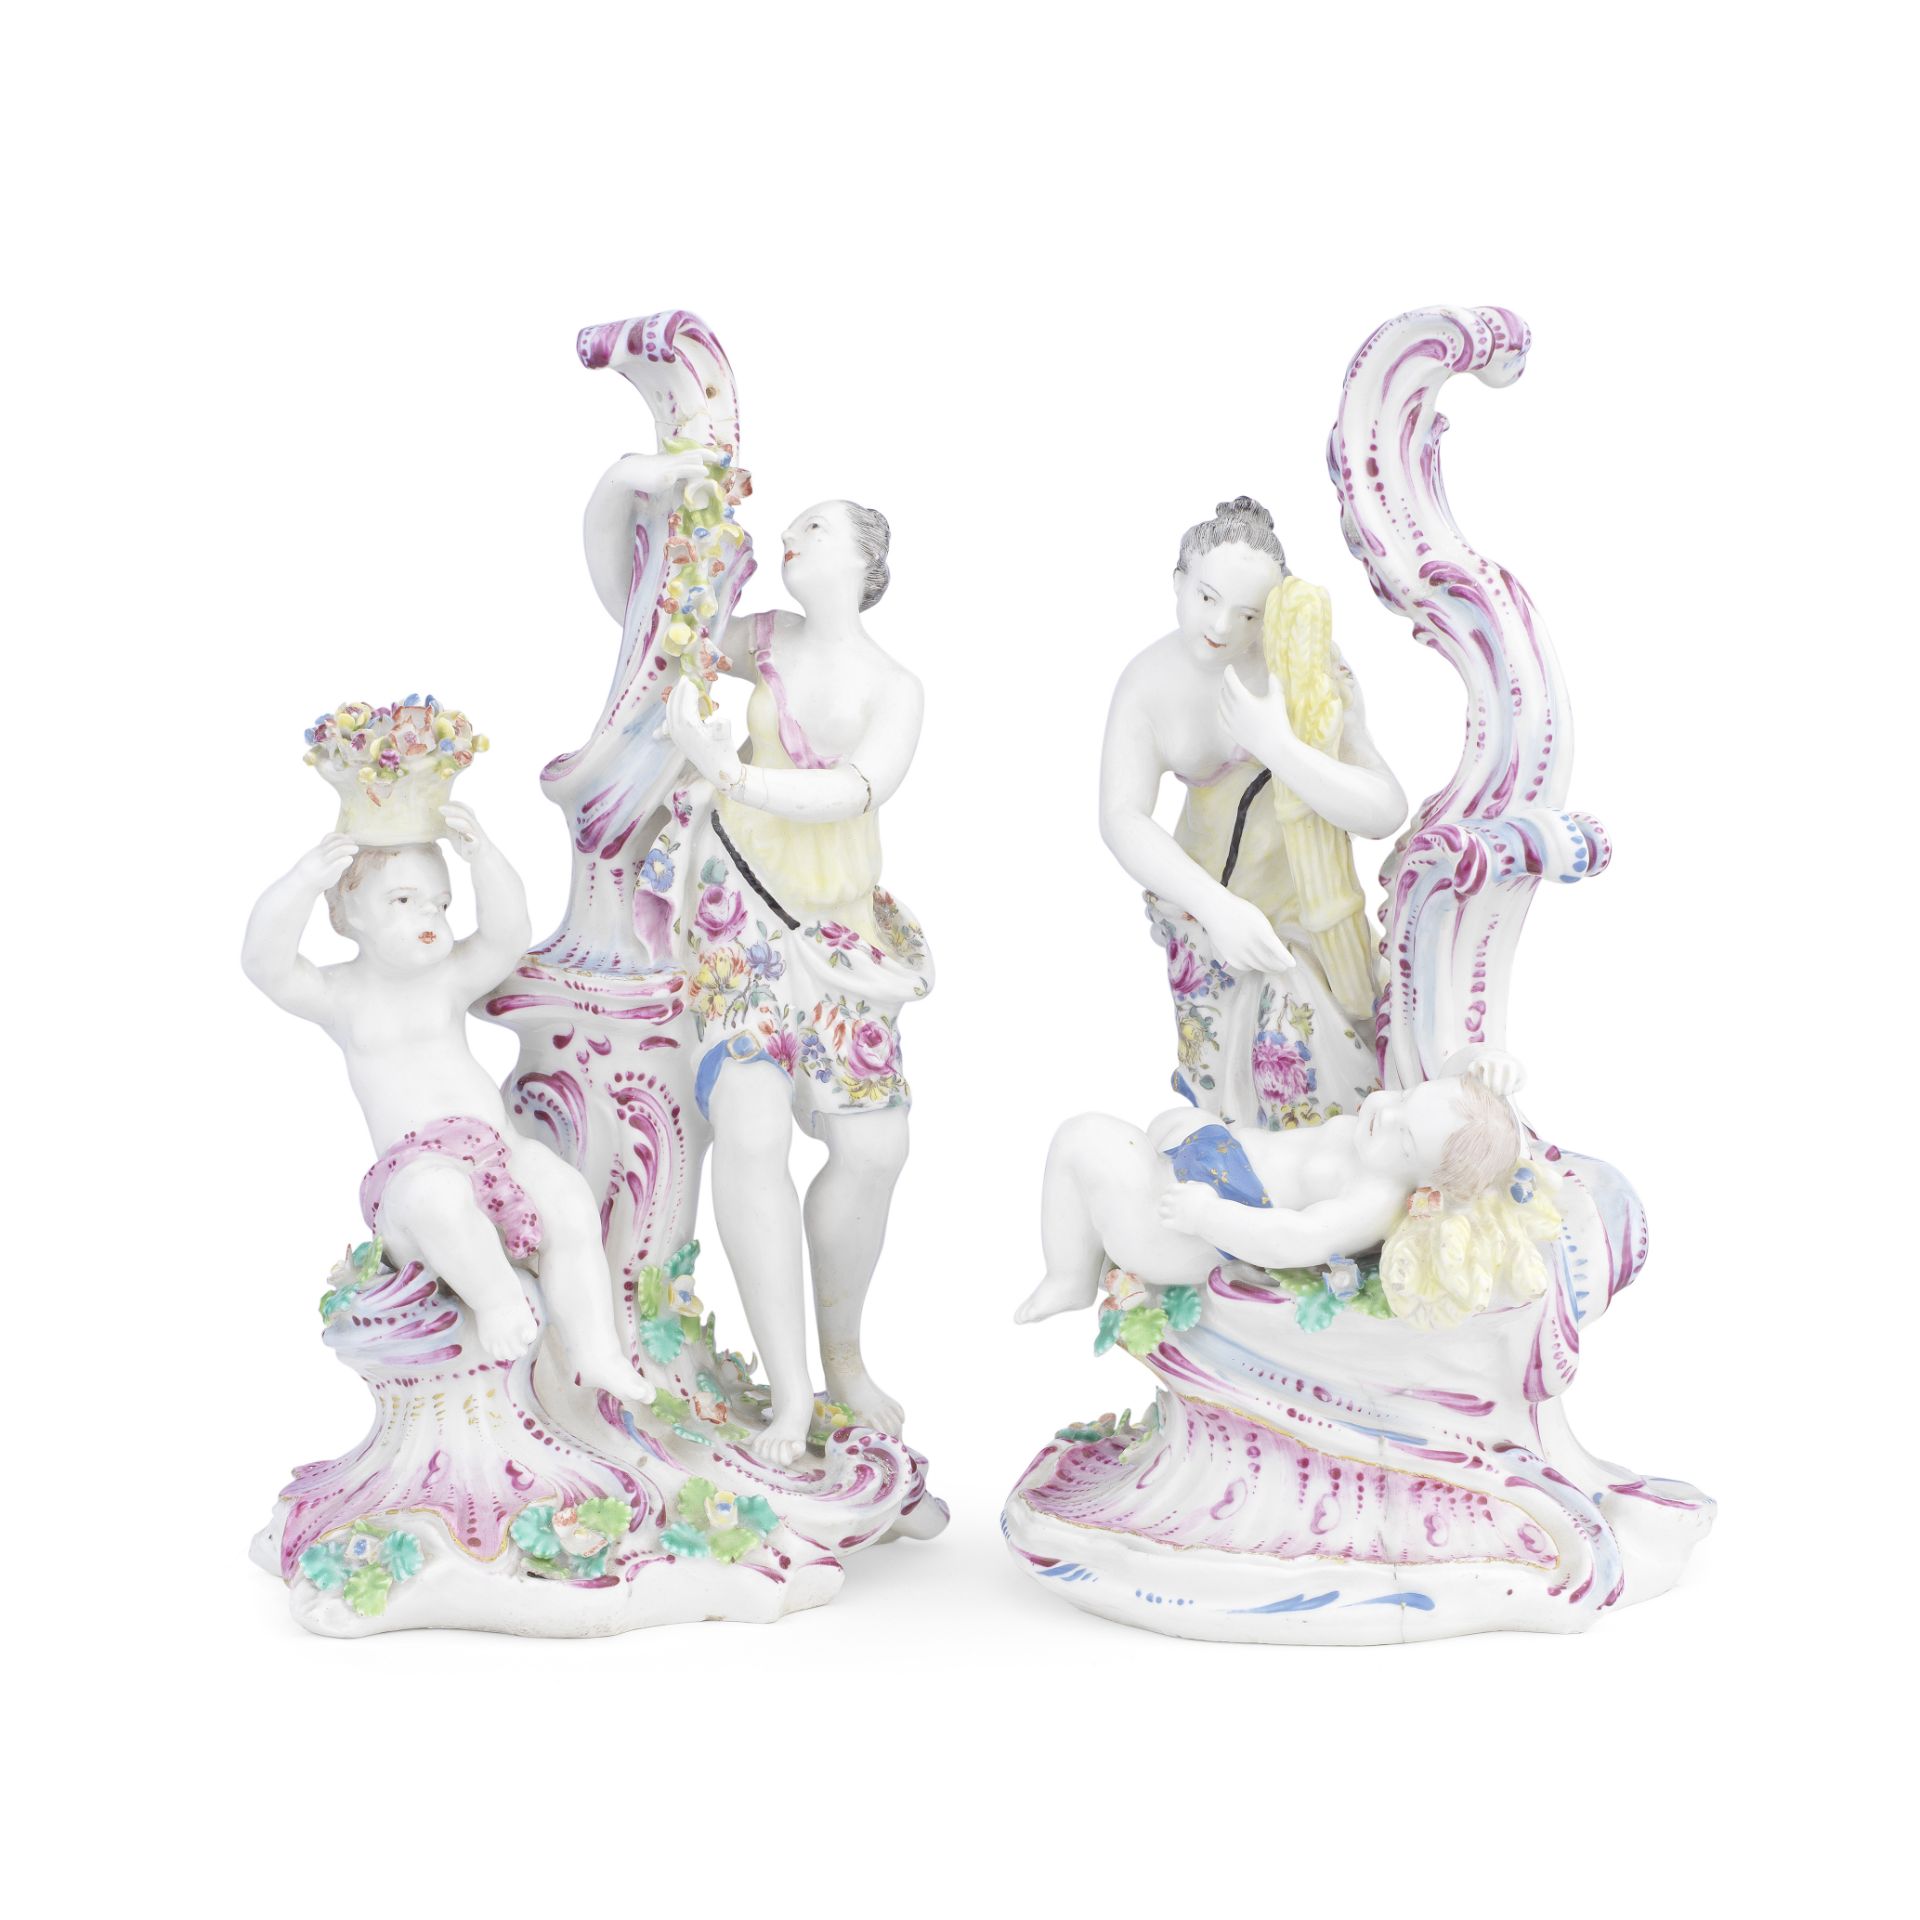 A pair of Bow figural candlesticks emblematic of Spring and Summer, circa 1760